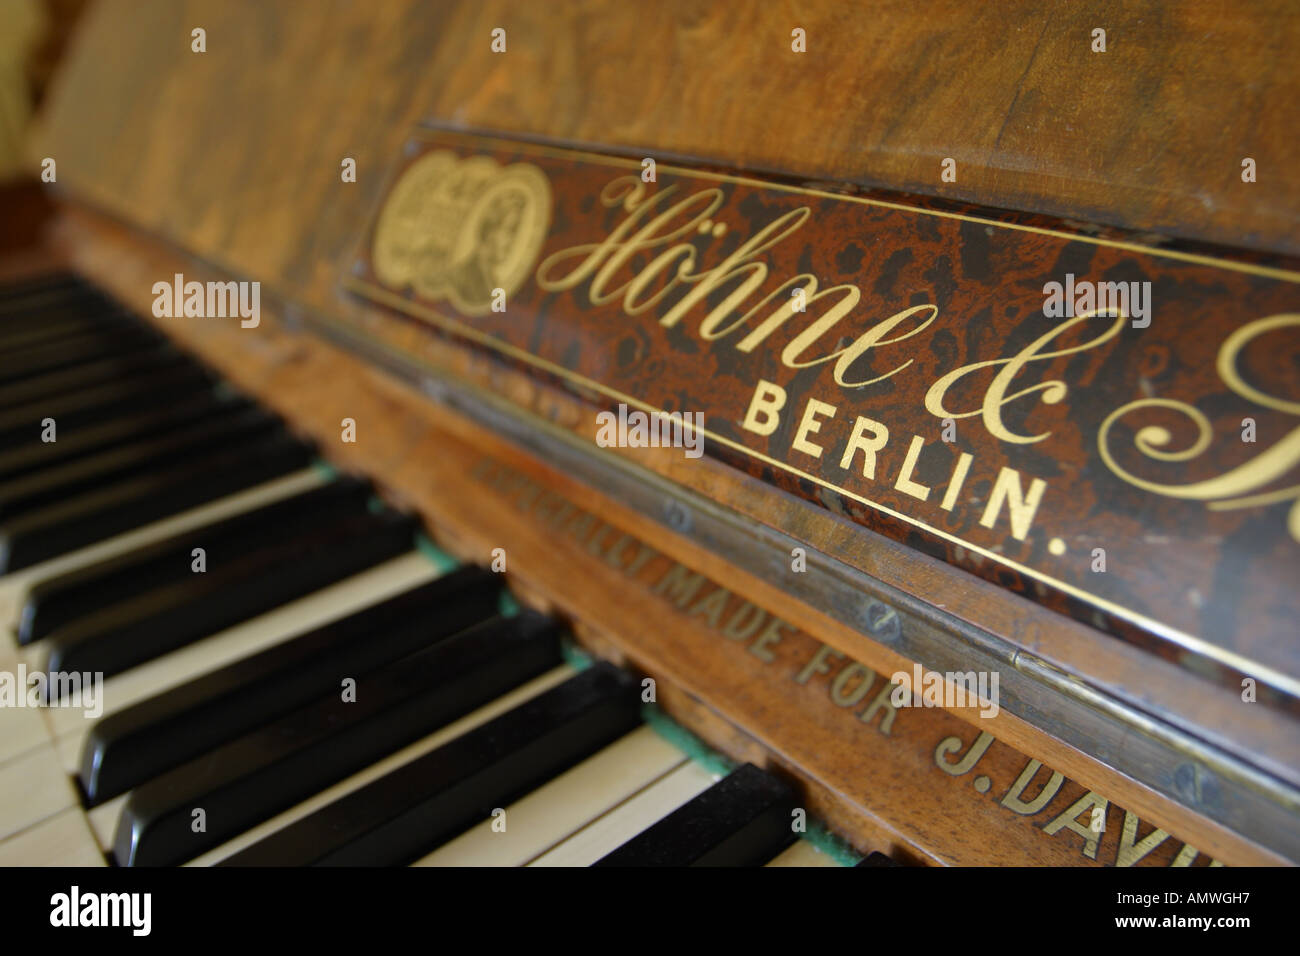 Hohne & Sell piano keyboard made in Berlin Germany Stock Photo - Alamy